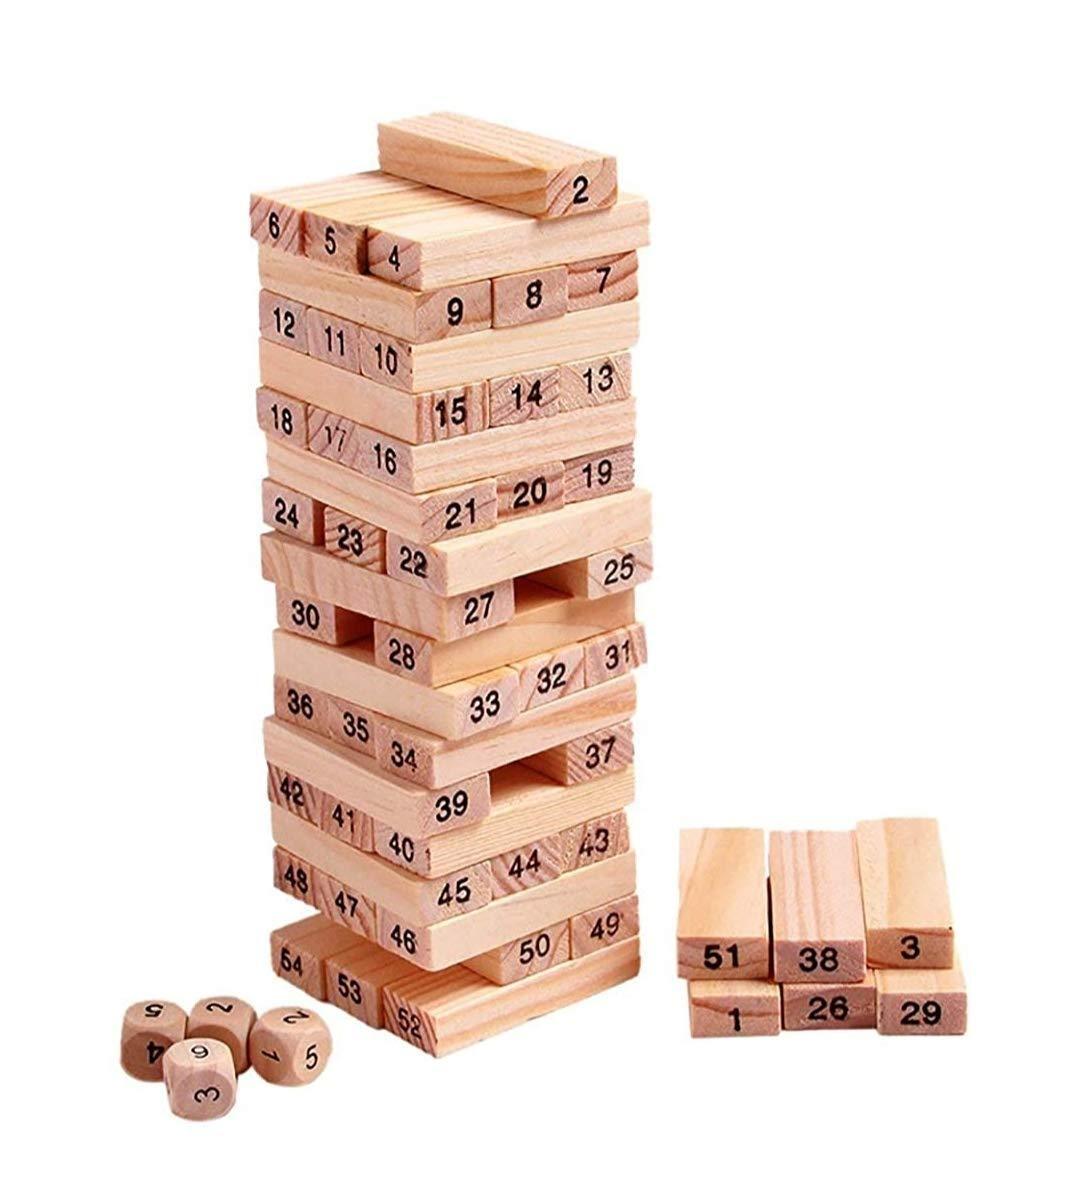 3903 54 Pieces Wooden Stacking Tower Numbers Building Blocks Game Board for Kids - SkyShopy